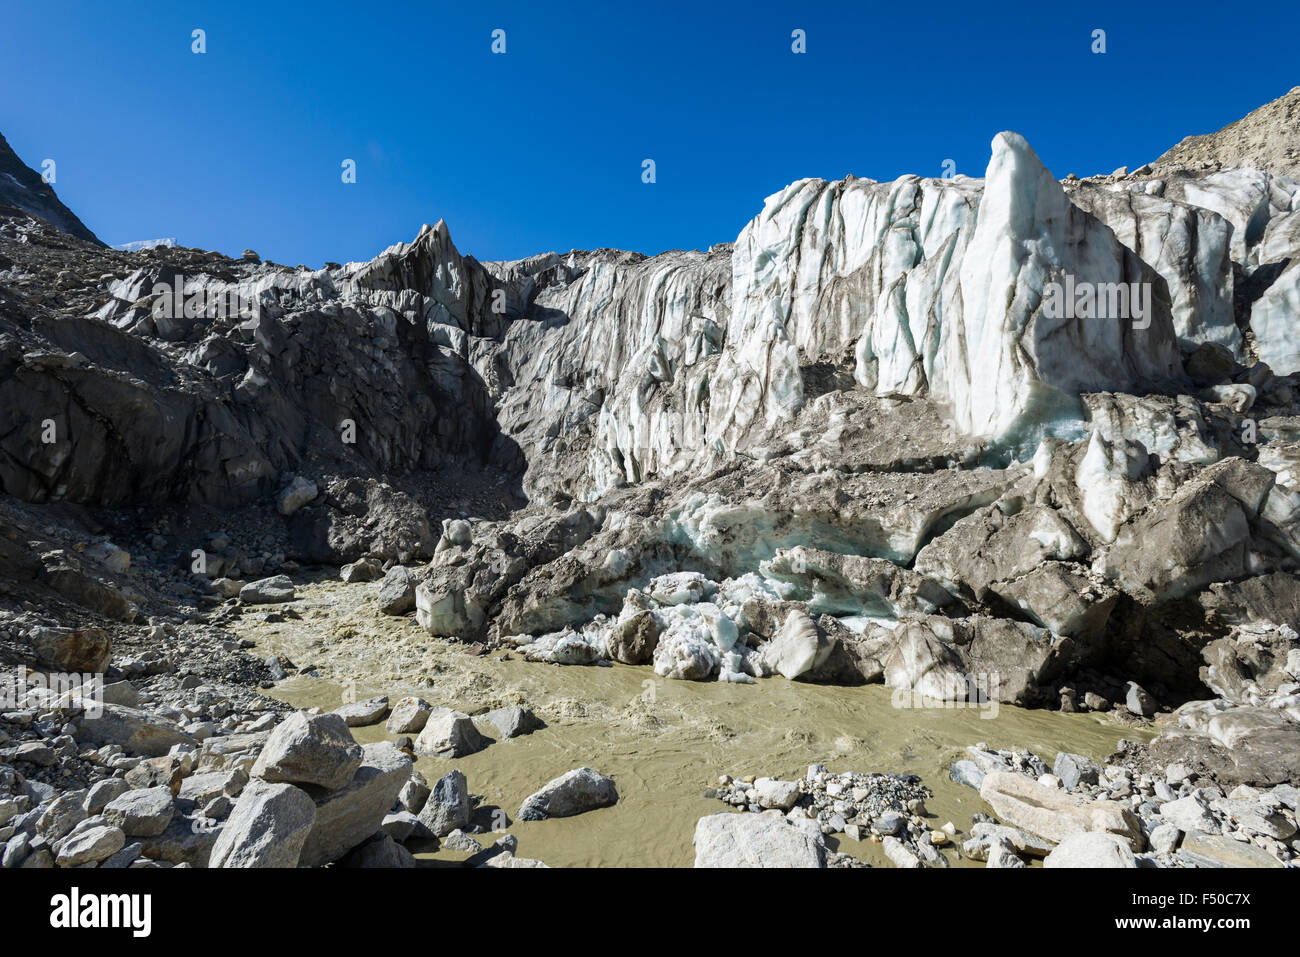 Gaumukh, the main source of the holy river Ganges, is located at the break-off edge of the Bhaghirati Glacier Stock Photo